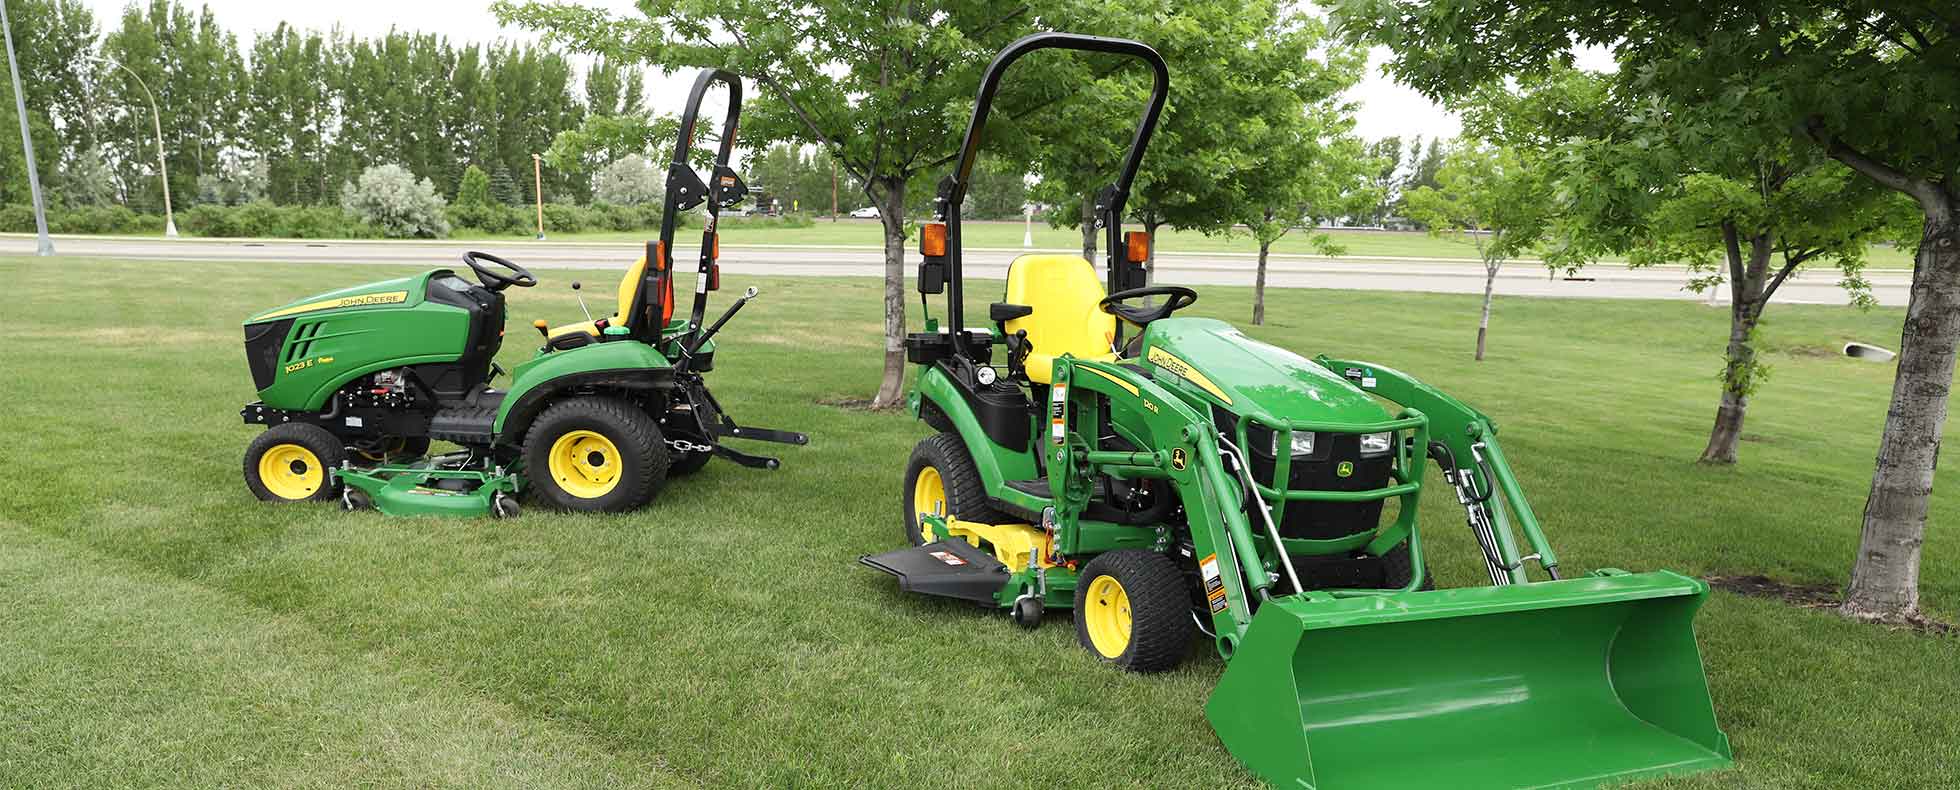 Compact Utility Tractors & Horsepower - How Much Do I Need?